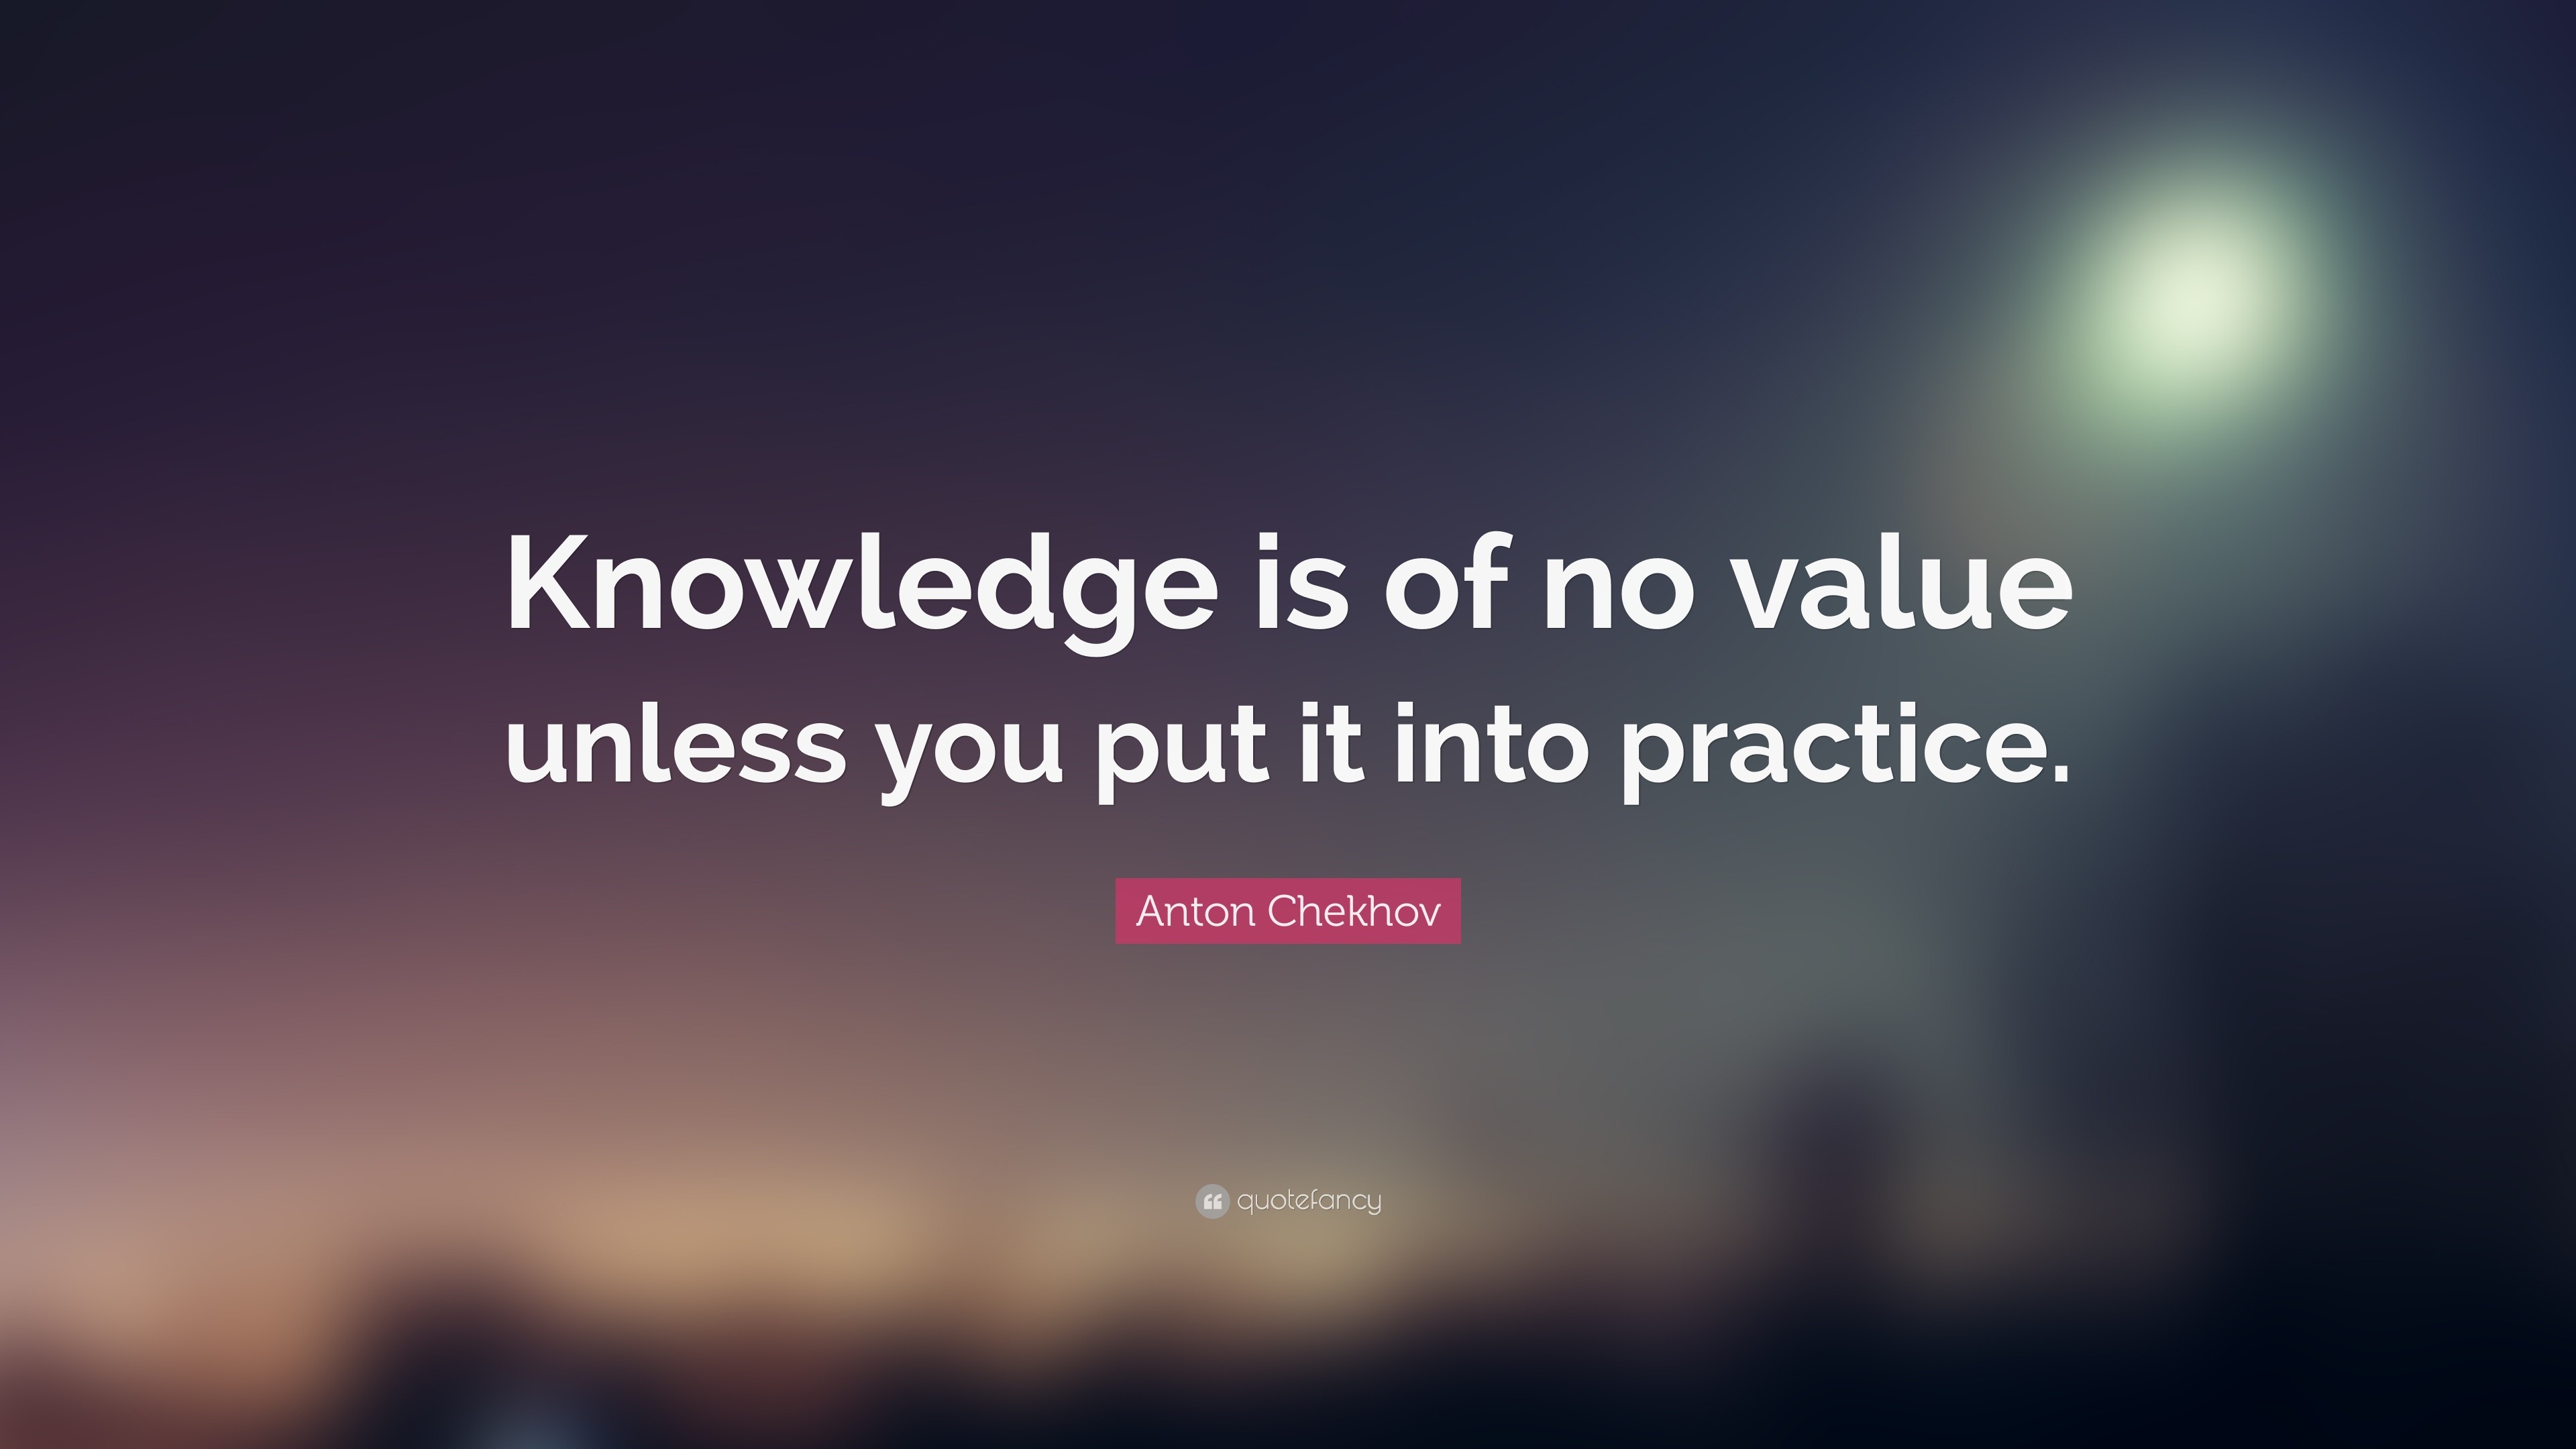 Anton Chekhov Quote: “Knowledge is of no value unless you put it into practice ...3840 x 2160